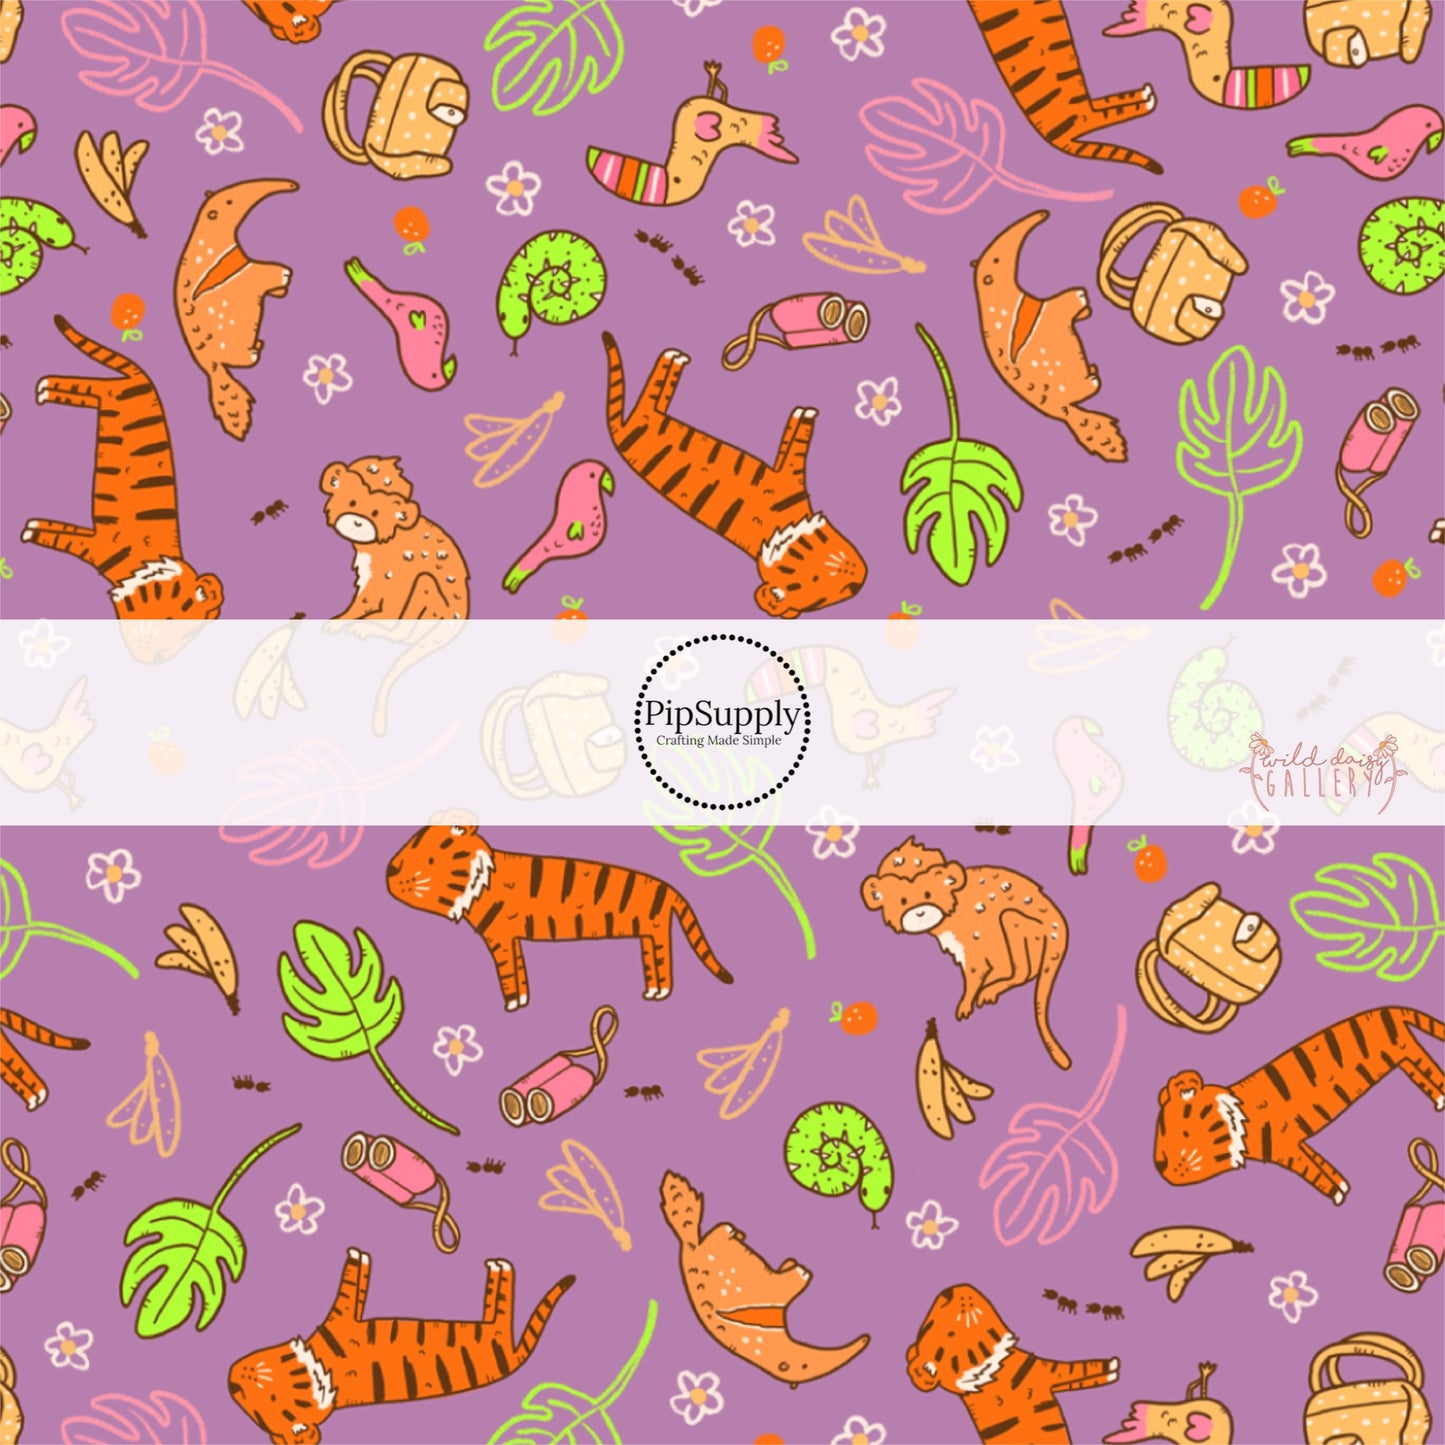 These jungle animal themed purple fabric by the yard features lions, birds, snakes, monkeys, toucans, bananas, leaves and flowers.